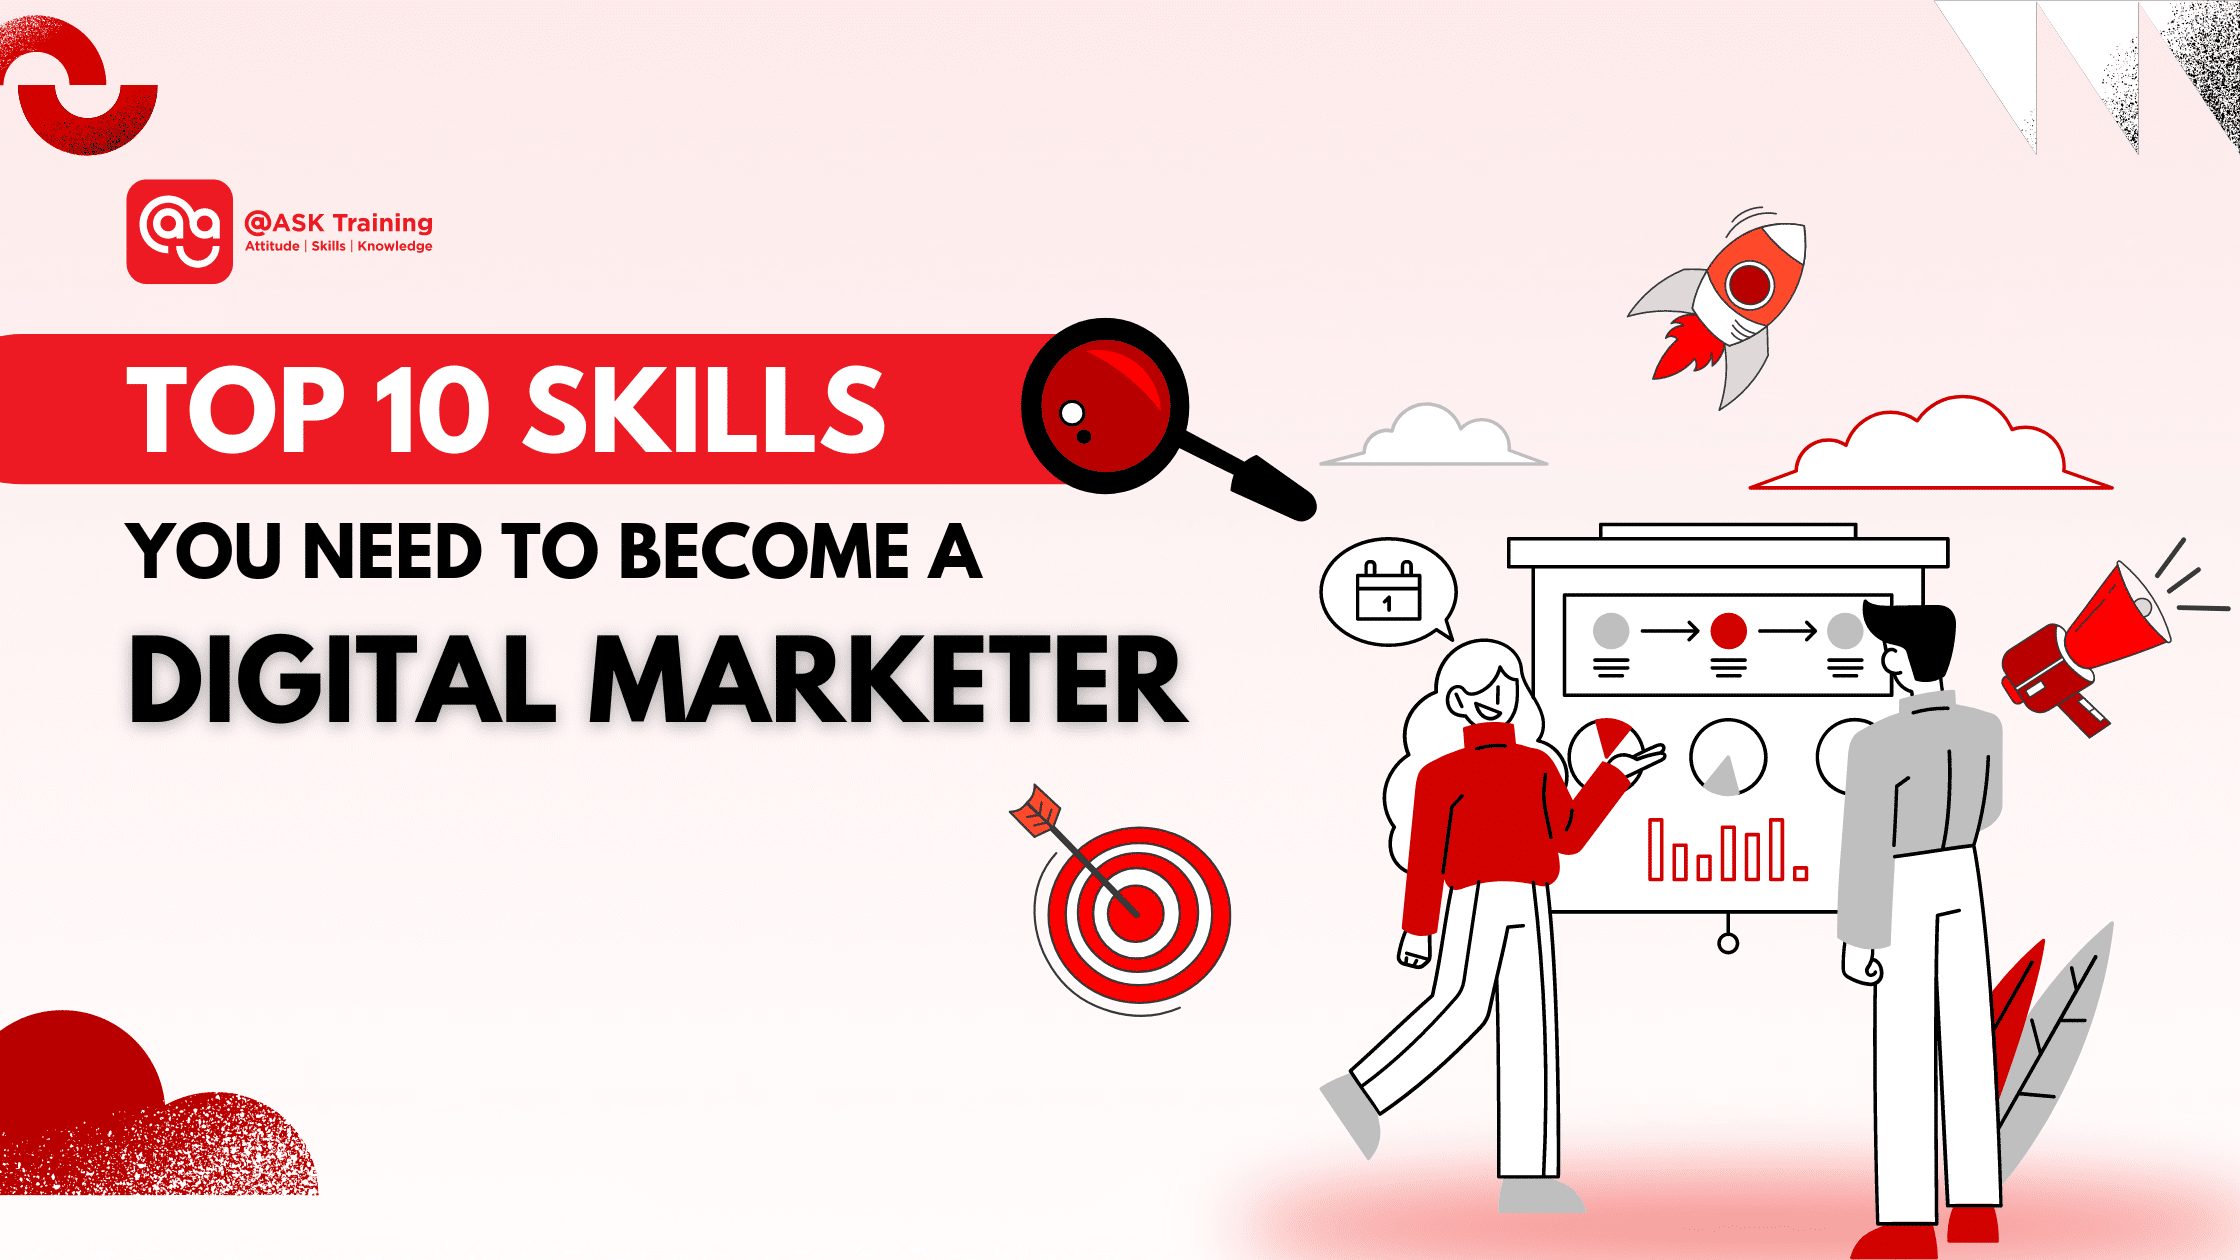 Header image of Top 10 Skills You Need to Become Digital Marketer